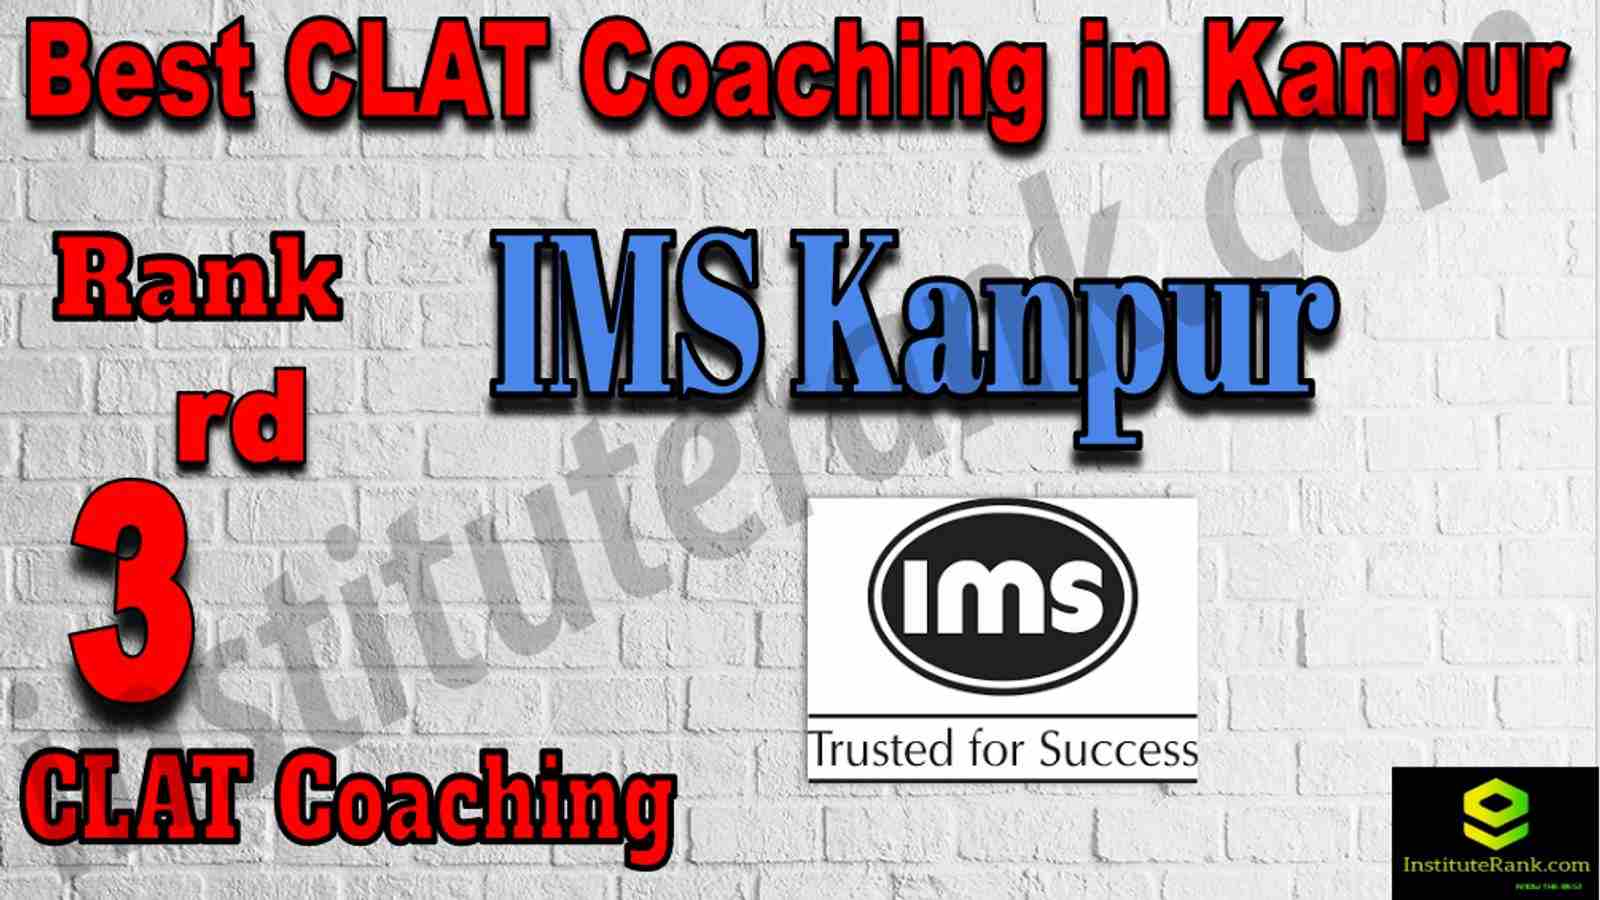 3rd Best CLAT Coaching in Kanpur